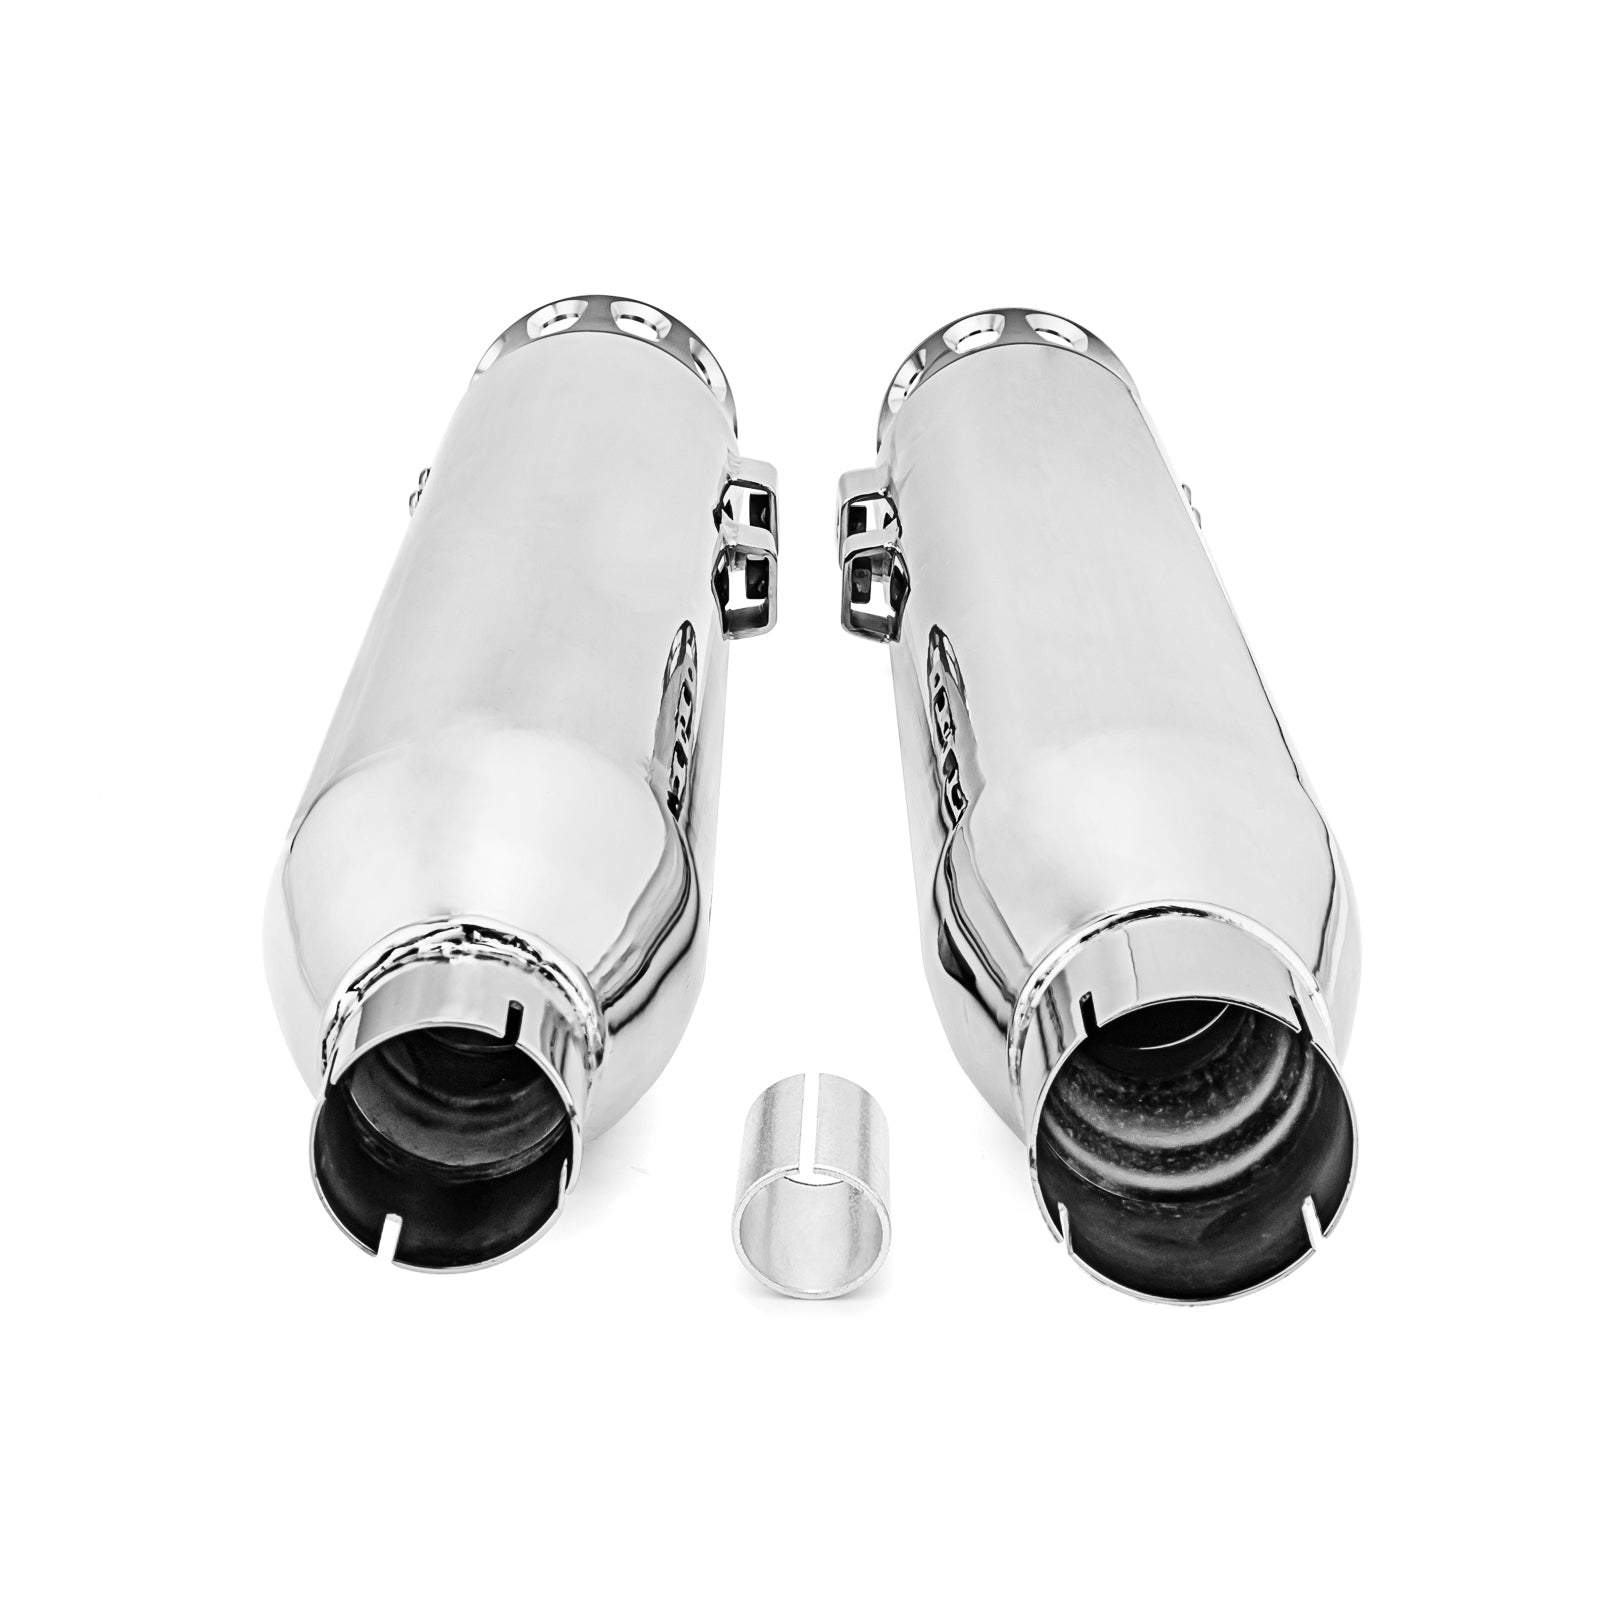 Chrome 4" Slip-On Mufflers Exhaust, Exhaust Pipes For 2017-up for Harley Touring